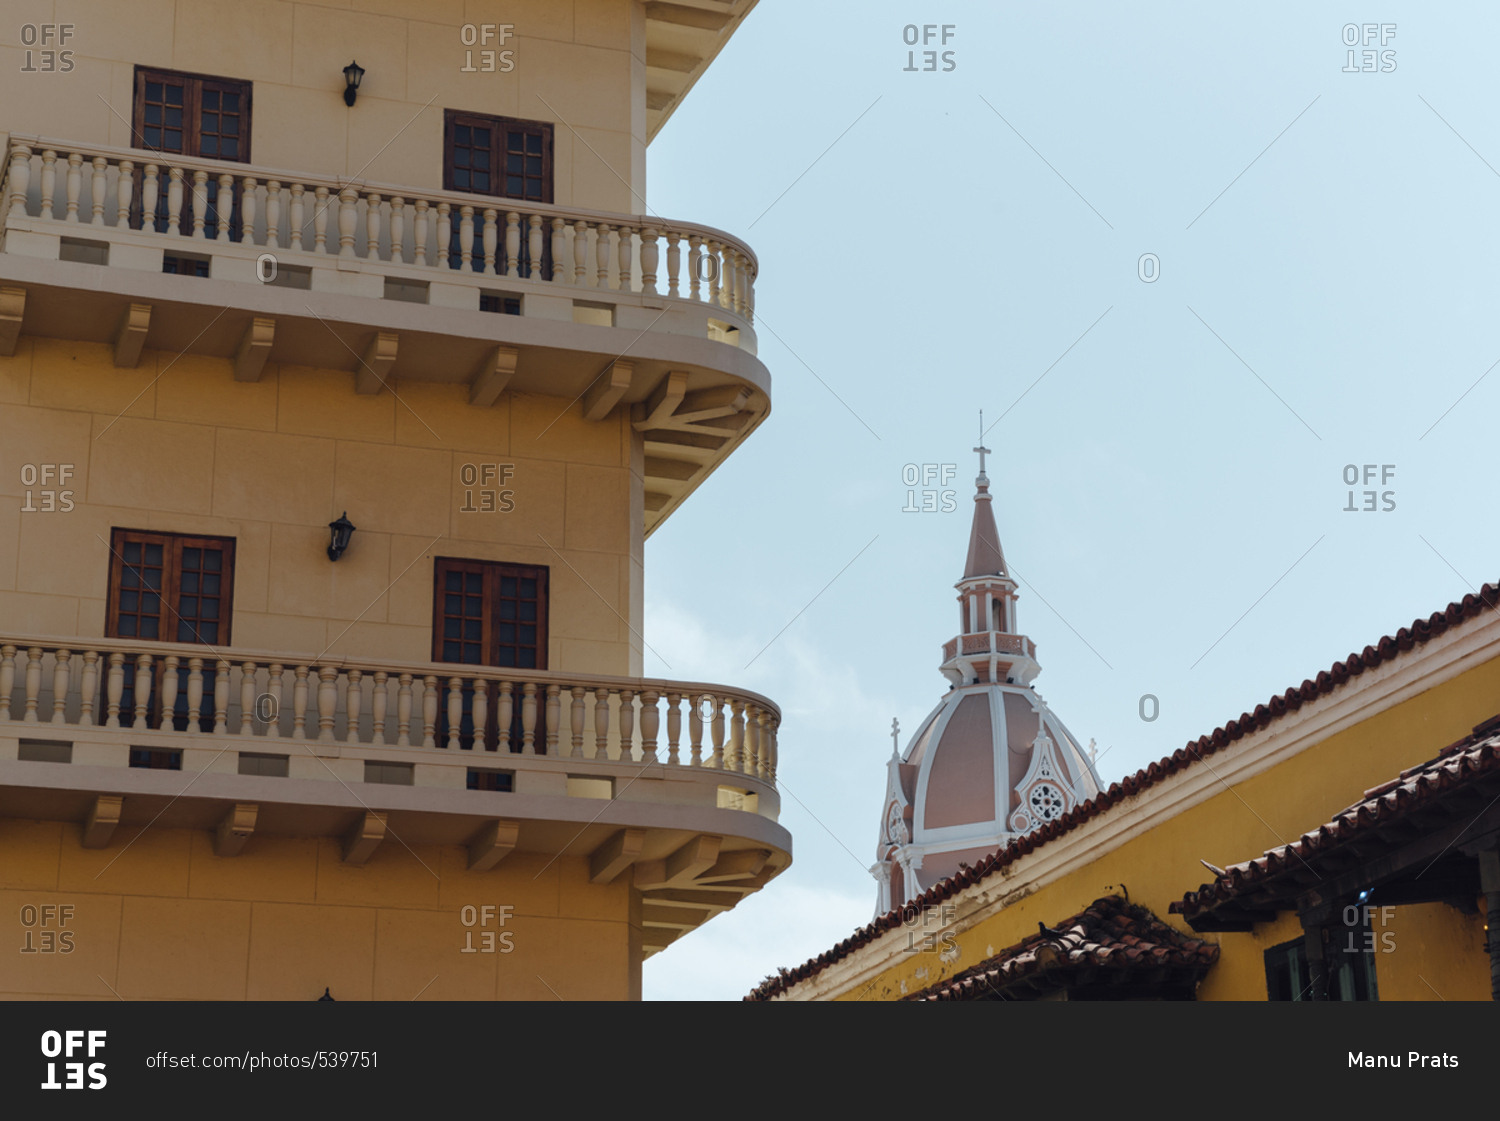 Colonial balconies beside a church in the walled city of Cartagena de Indias, Colombia